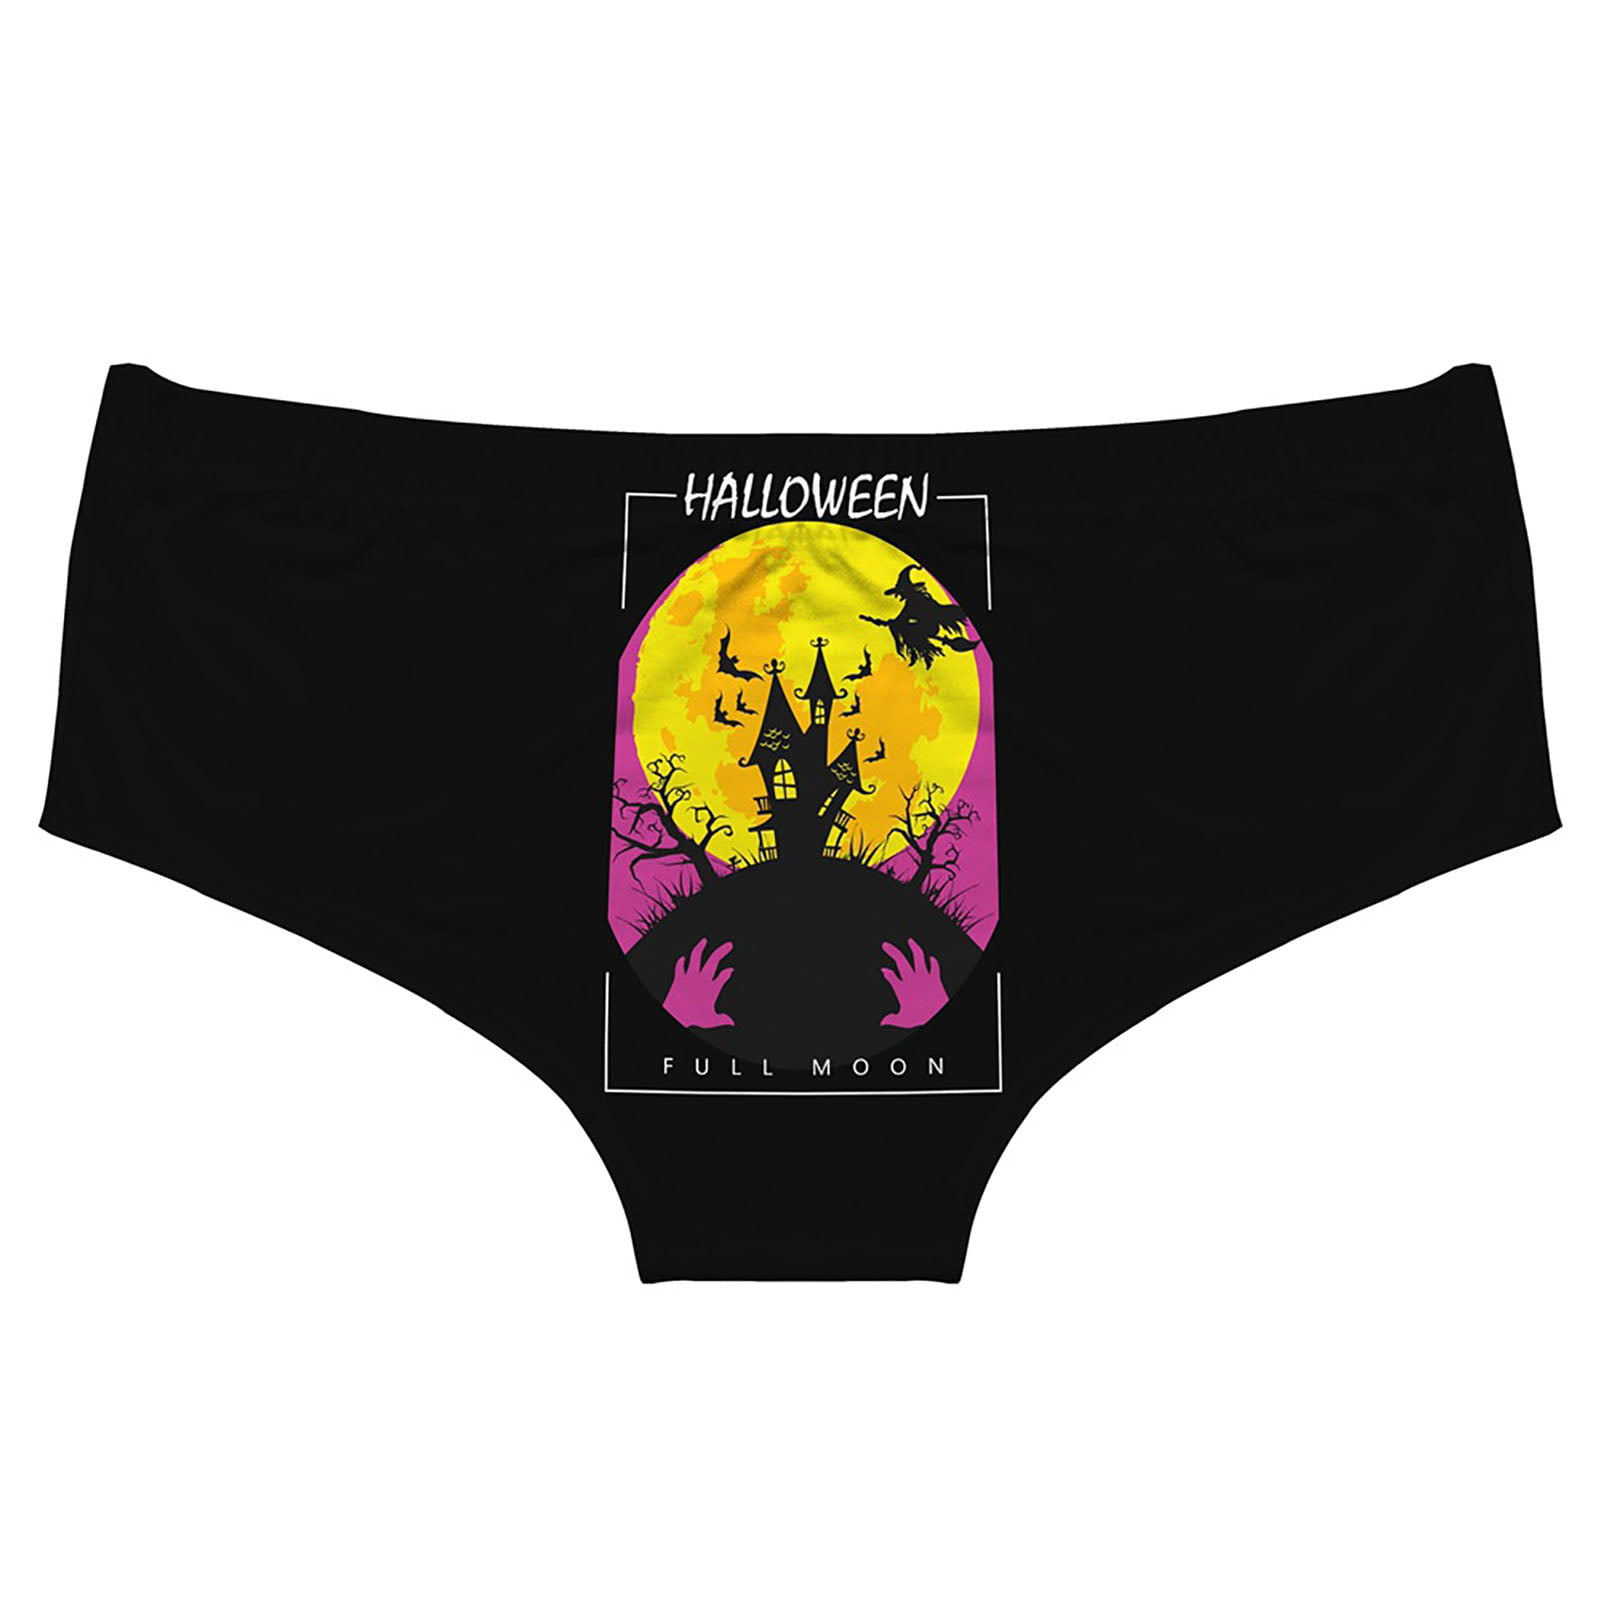 rygai Low-Rise Elastic Waist Stretchy Women Panties Halloween Themed Ghost  Skull Print Briefs for Sleeping,J,One Size 